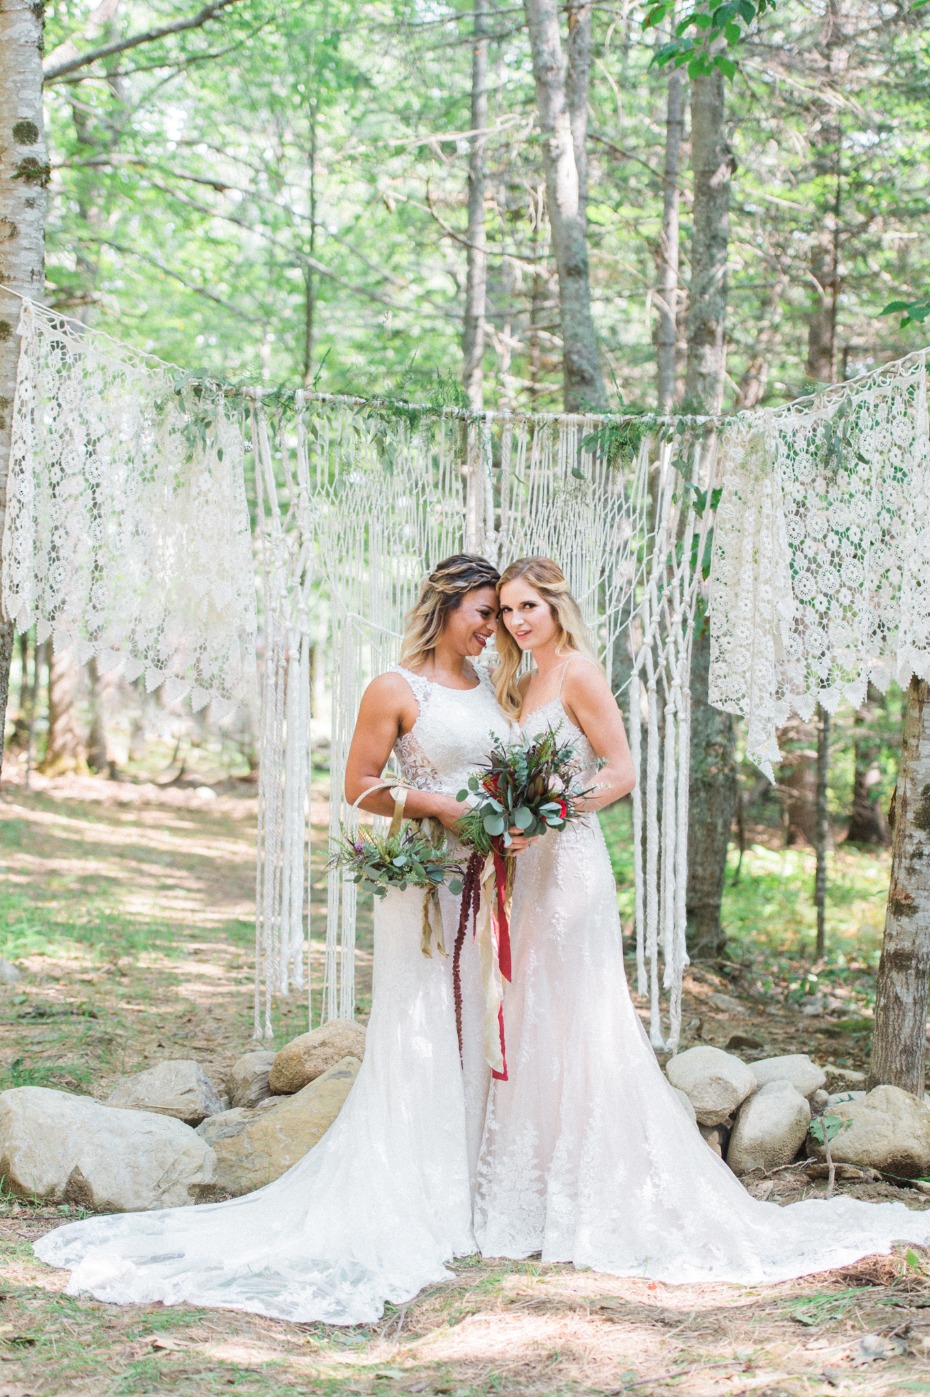 Macrame ceremony backdrop with lace